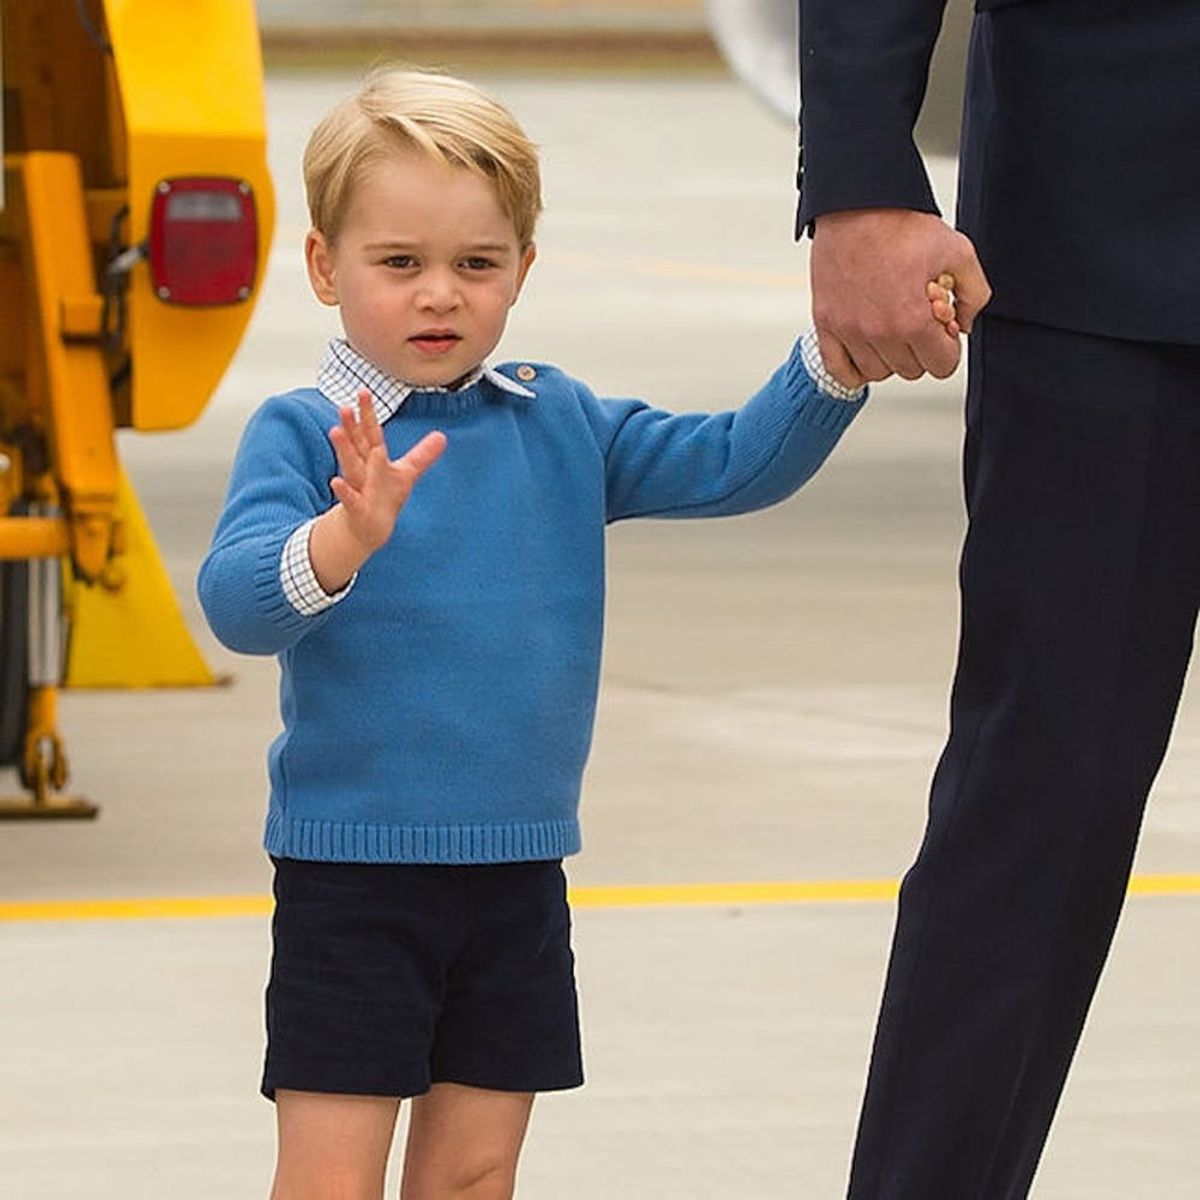 Morning Buzz! This Video of Prince George Leaving Justin Trudeau Hanging on a High Five Will Make Your Day + More